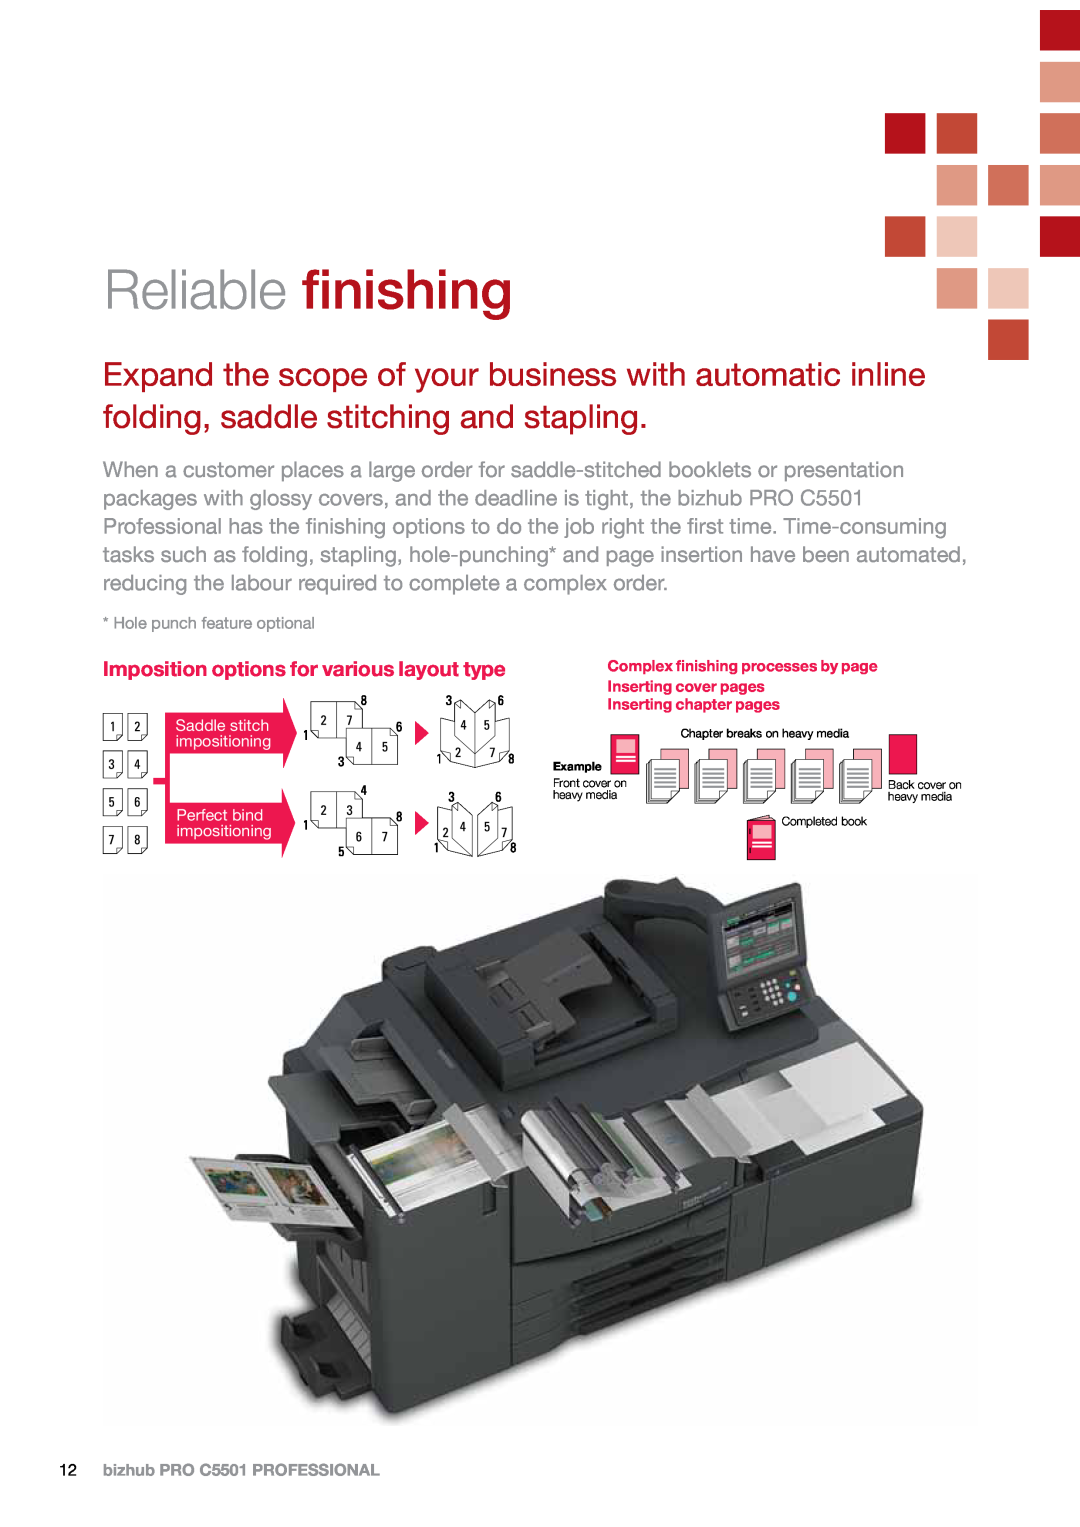 Konica Minolta C5501 manual Reliable finishing, Imposition options for various layout type 